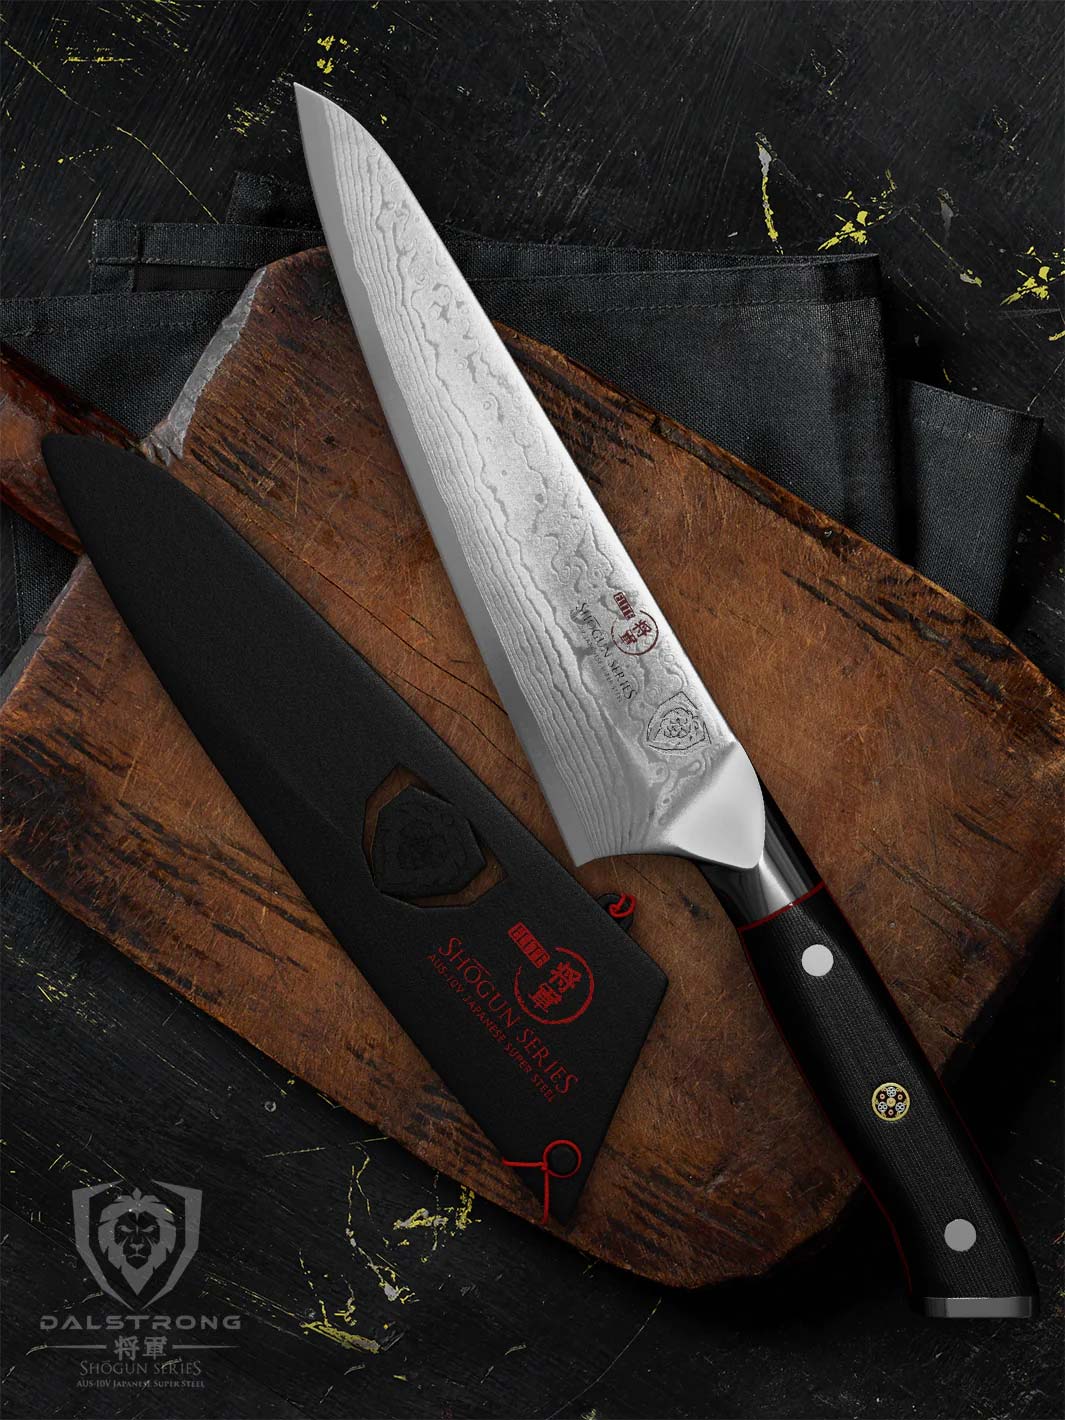 Dalstrong shogun series 7 inch chef knife with black handle and sheath on a wooden board.